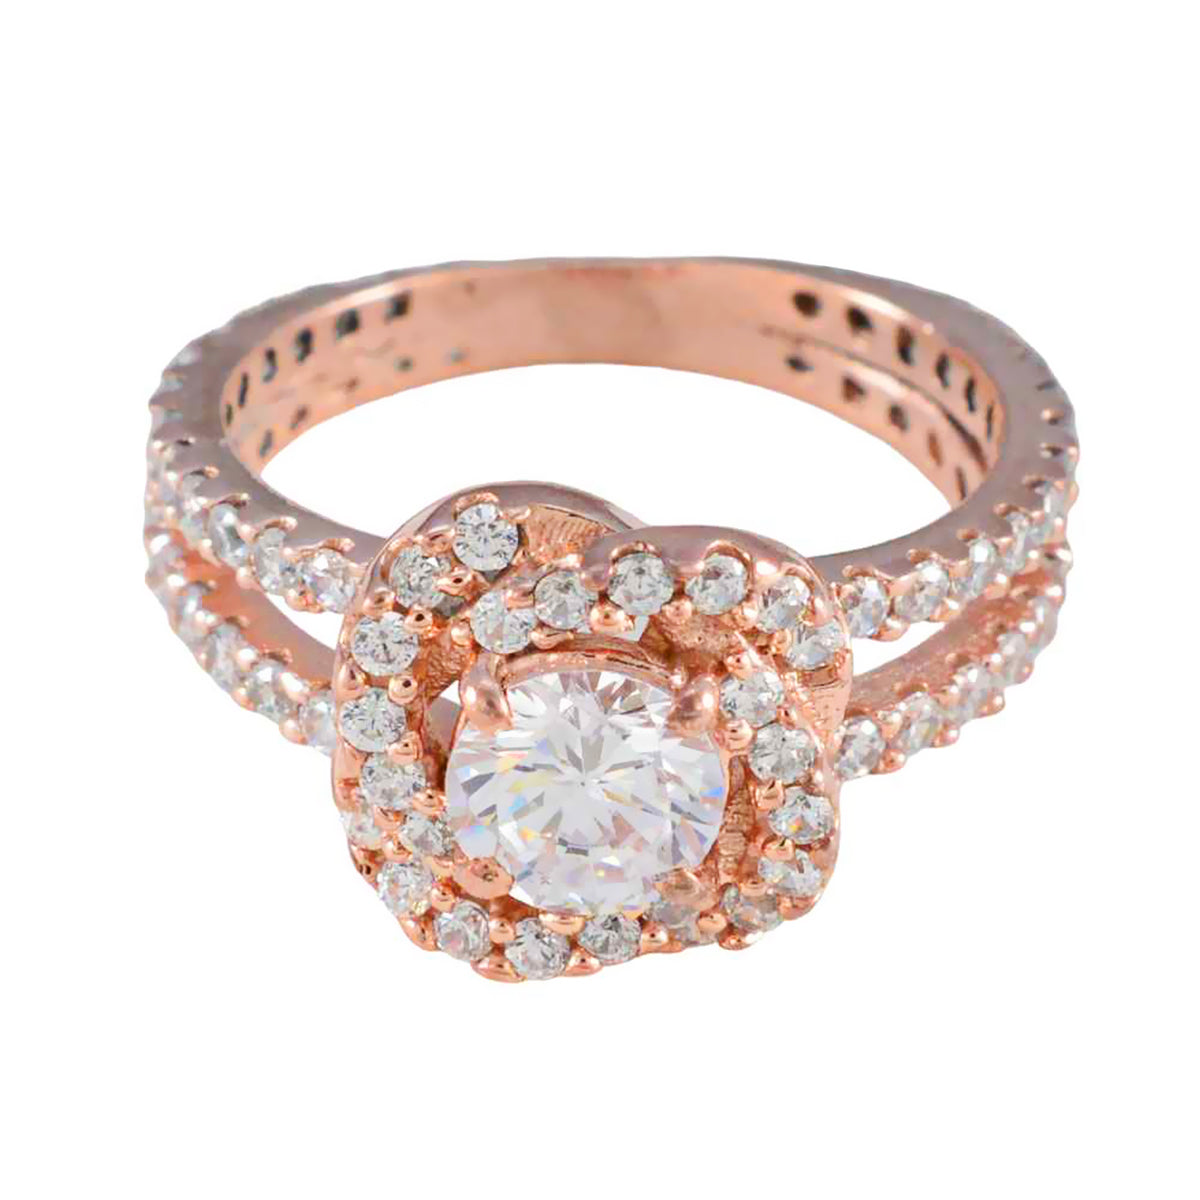 Riyo Complete Silver Ring With Rose Gold Plating White CZ Stone Round Shape Prong Setting Custom Jewelry Easter Ring